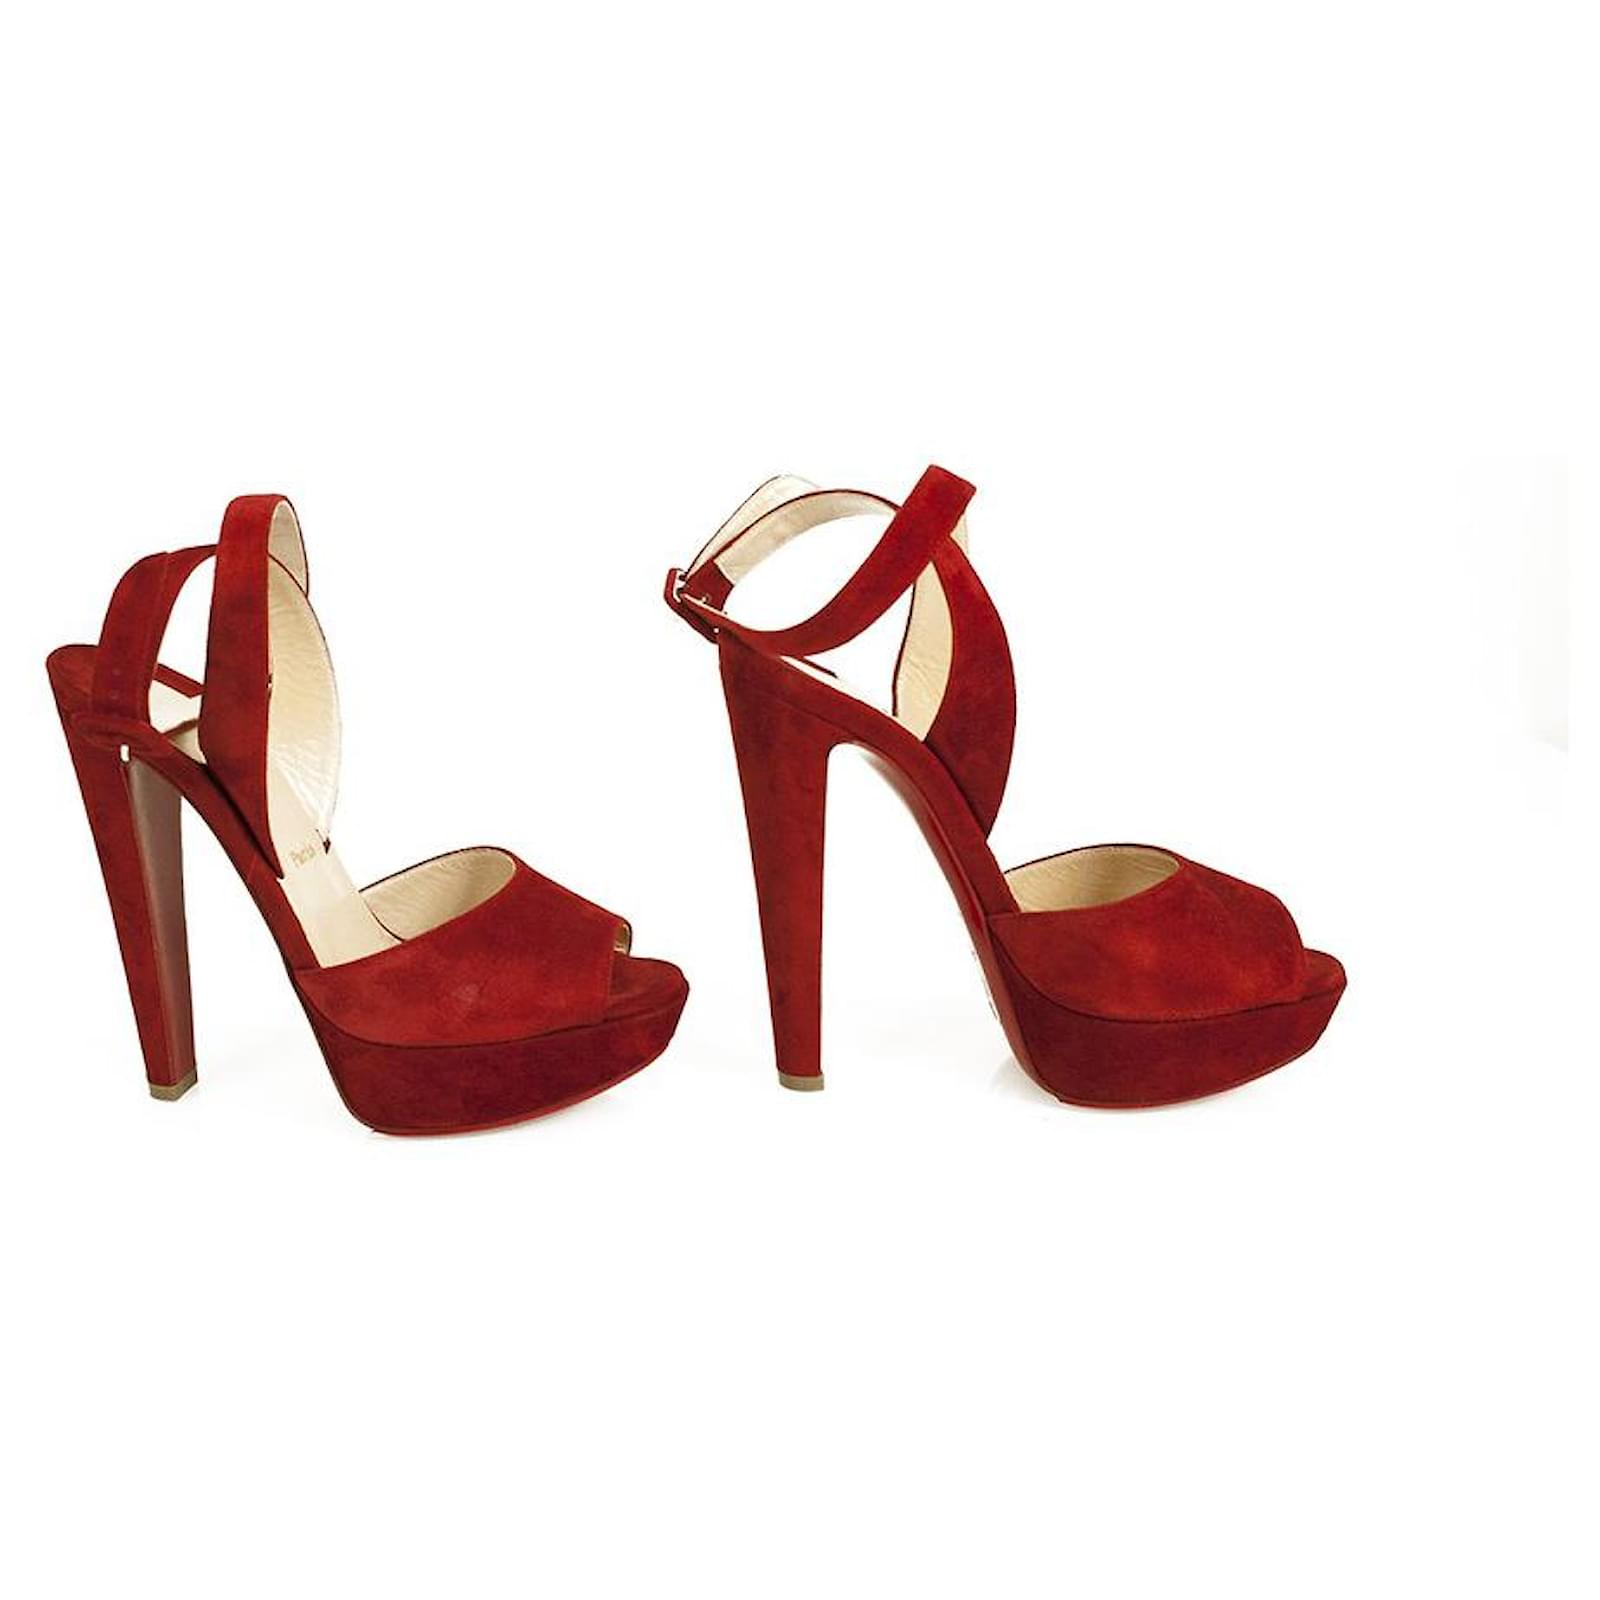 Christian Louboutin Louloudance Red Suede Platform Red Sole Sandal